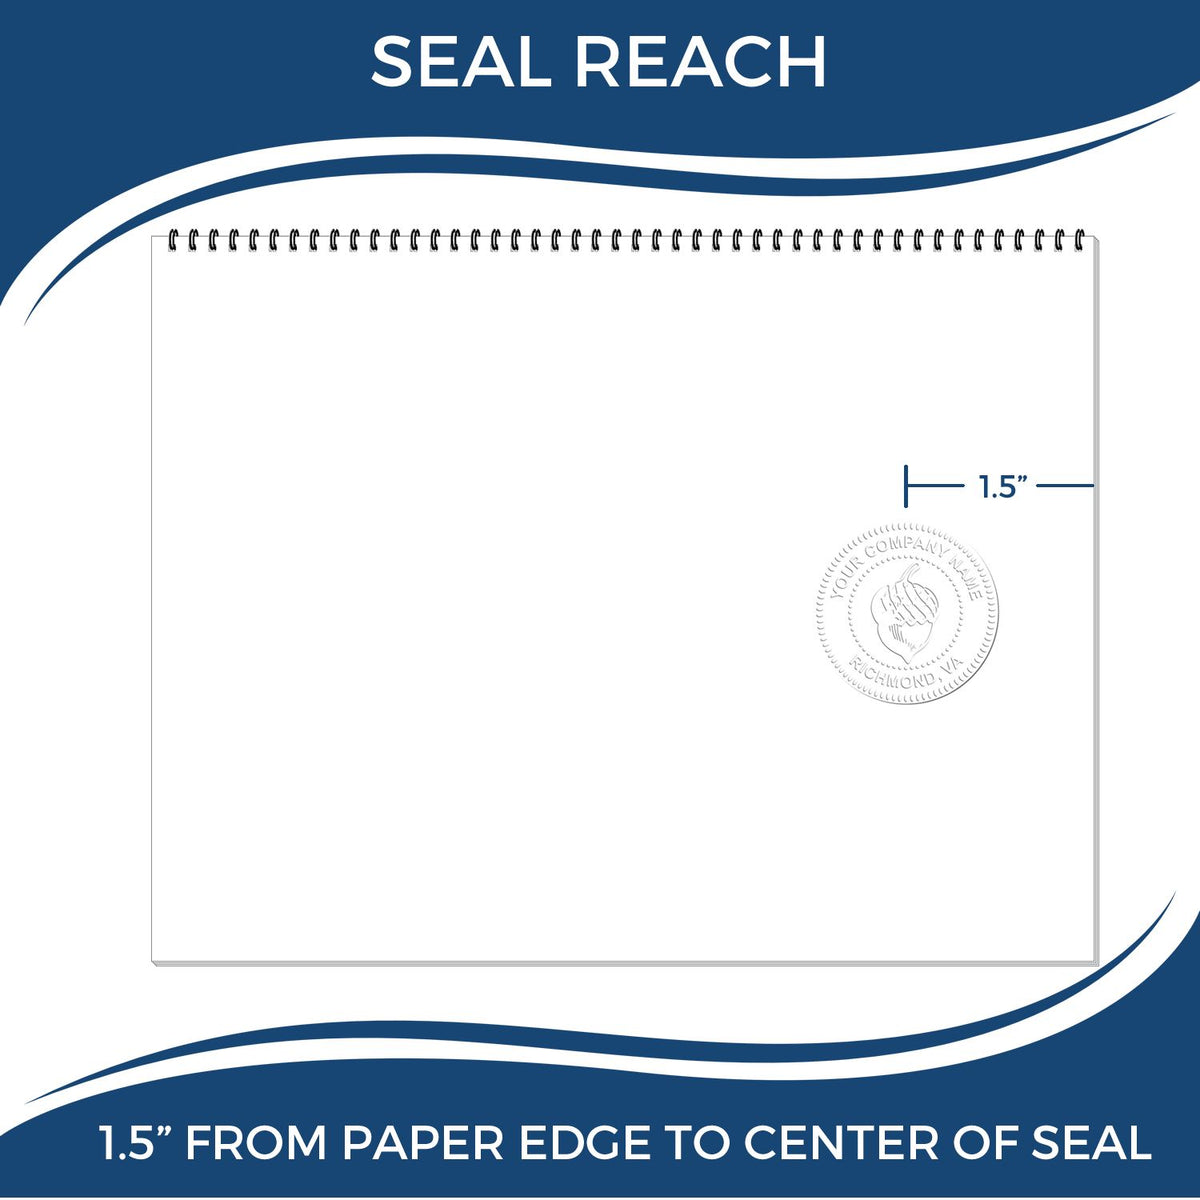 An infographic showing the seal reach which is represented by a ruler and a miniature seal image of the Hybrid Hawaii Architect Seal